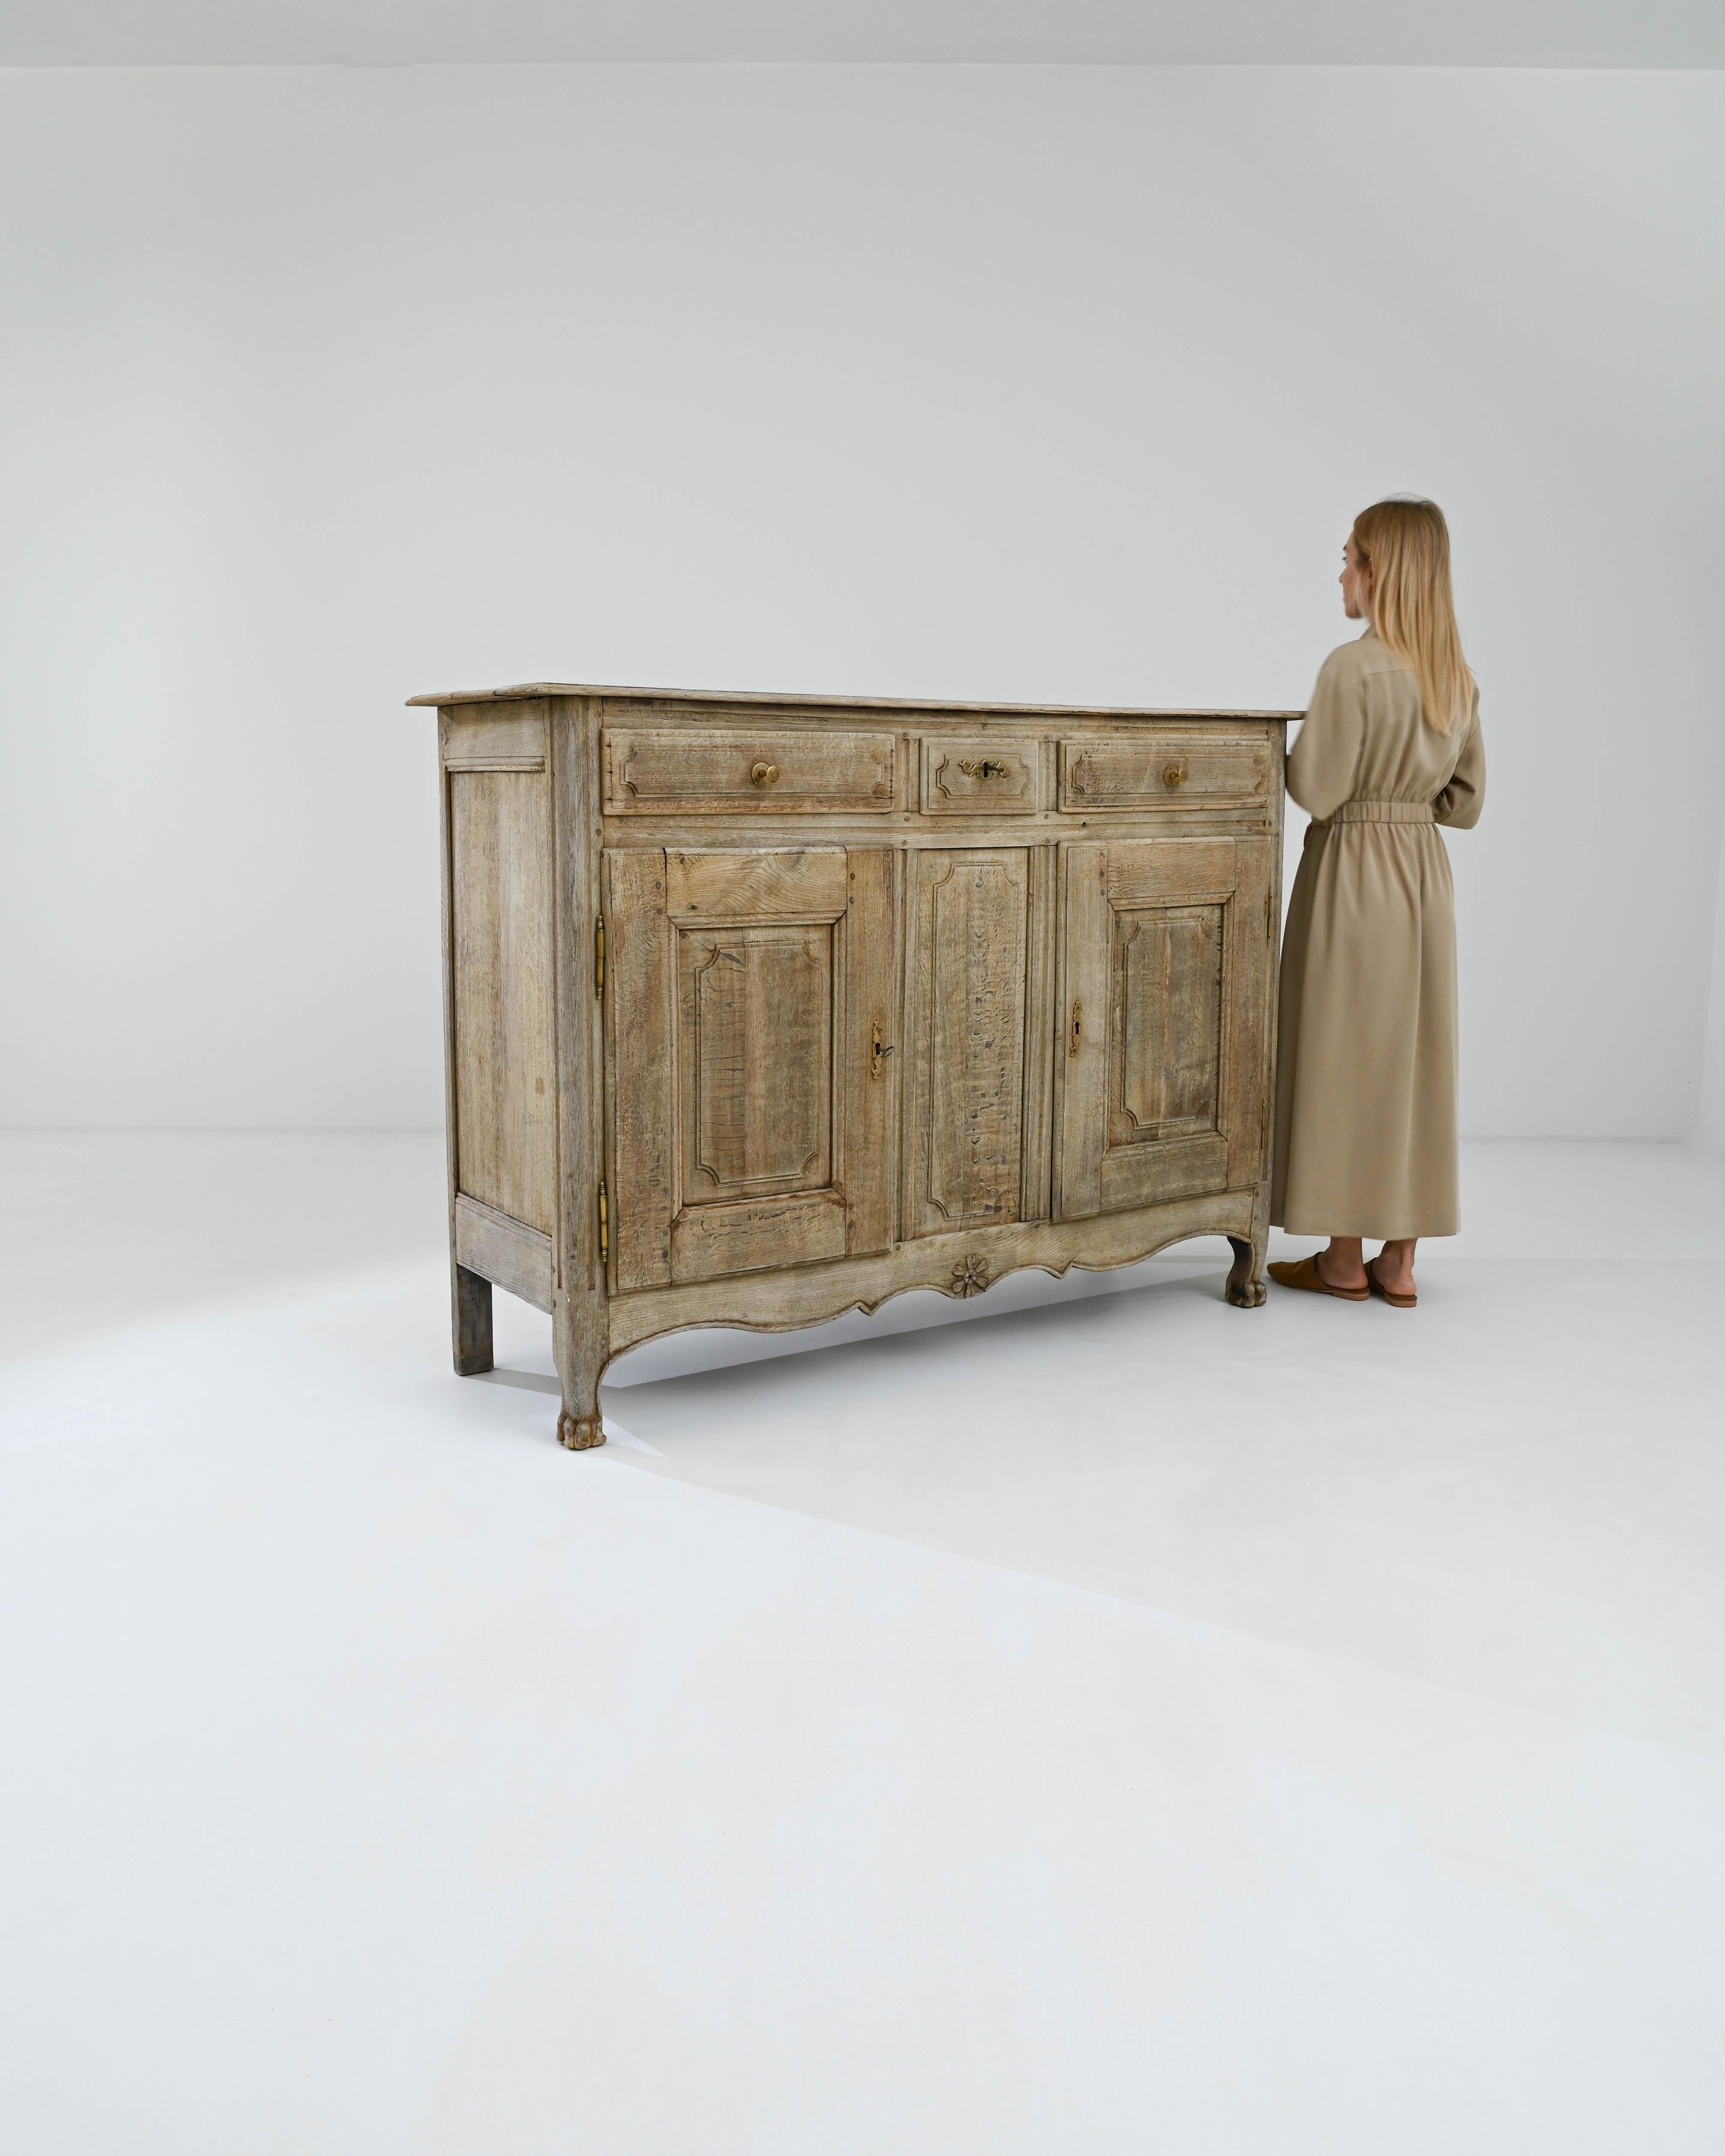 This timeless piece of furniture is a 19th-century French Bleached Oak Buffet that showcases the craftsmanship of its era. It is crowned with sophistication and features three drawers at the top. The two side drawers provide ample space, while the